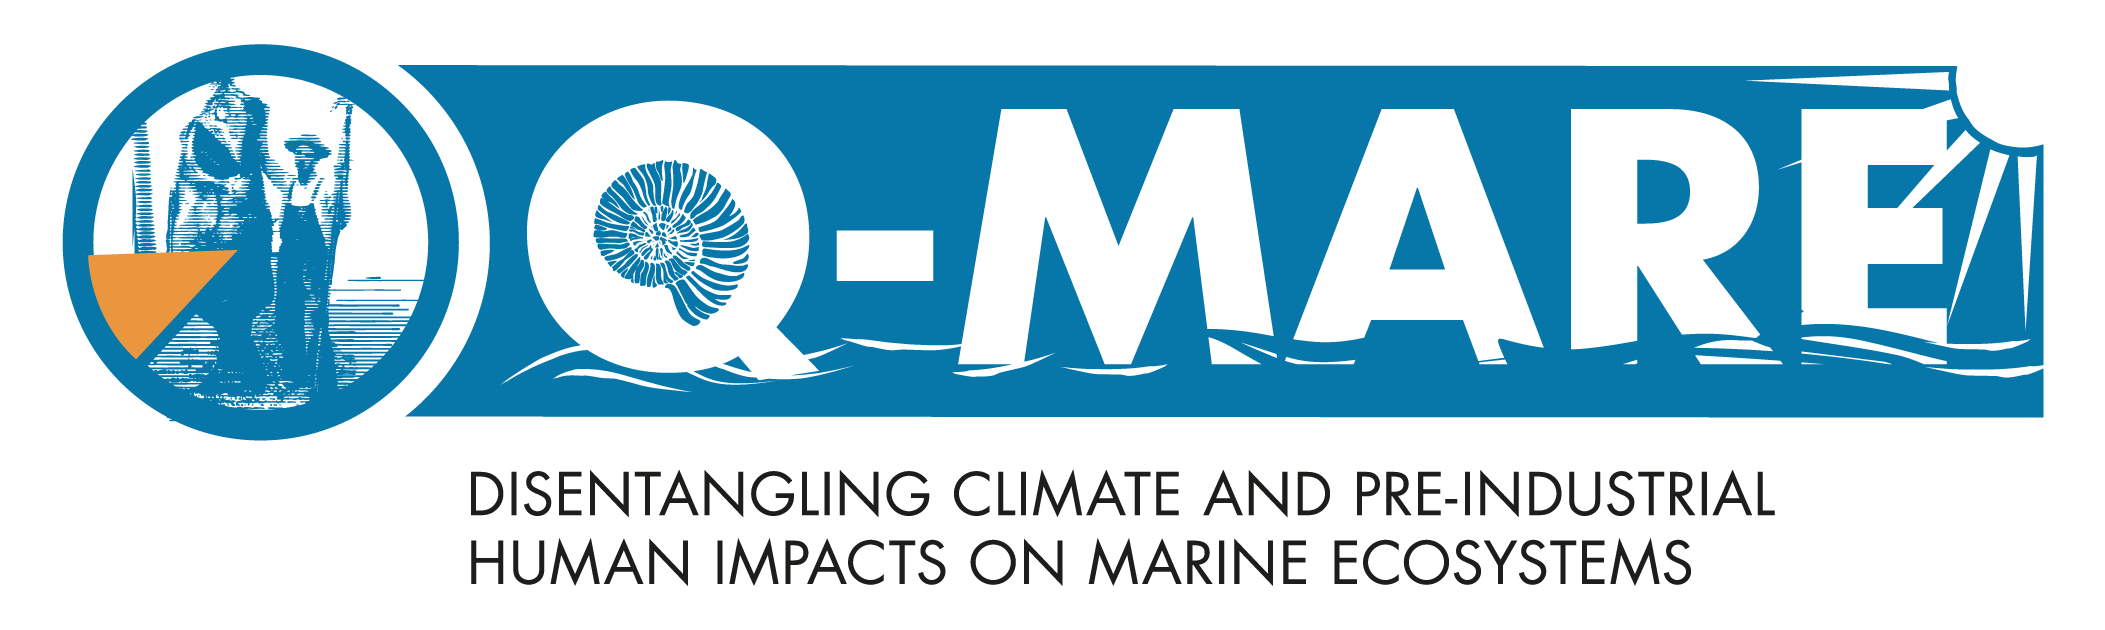 Q-MARE logo with title